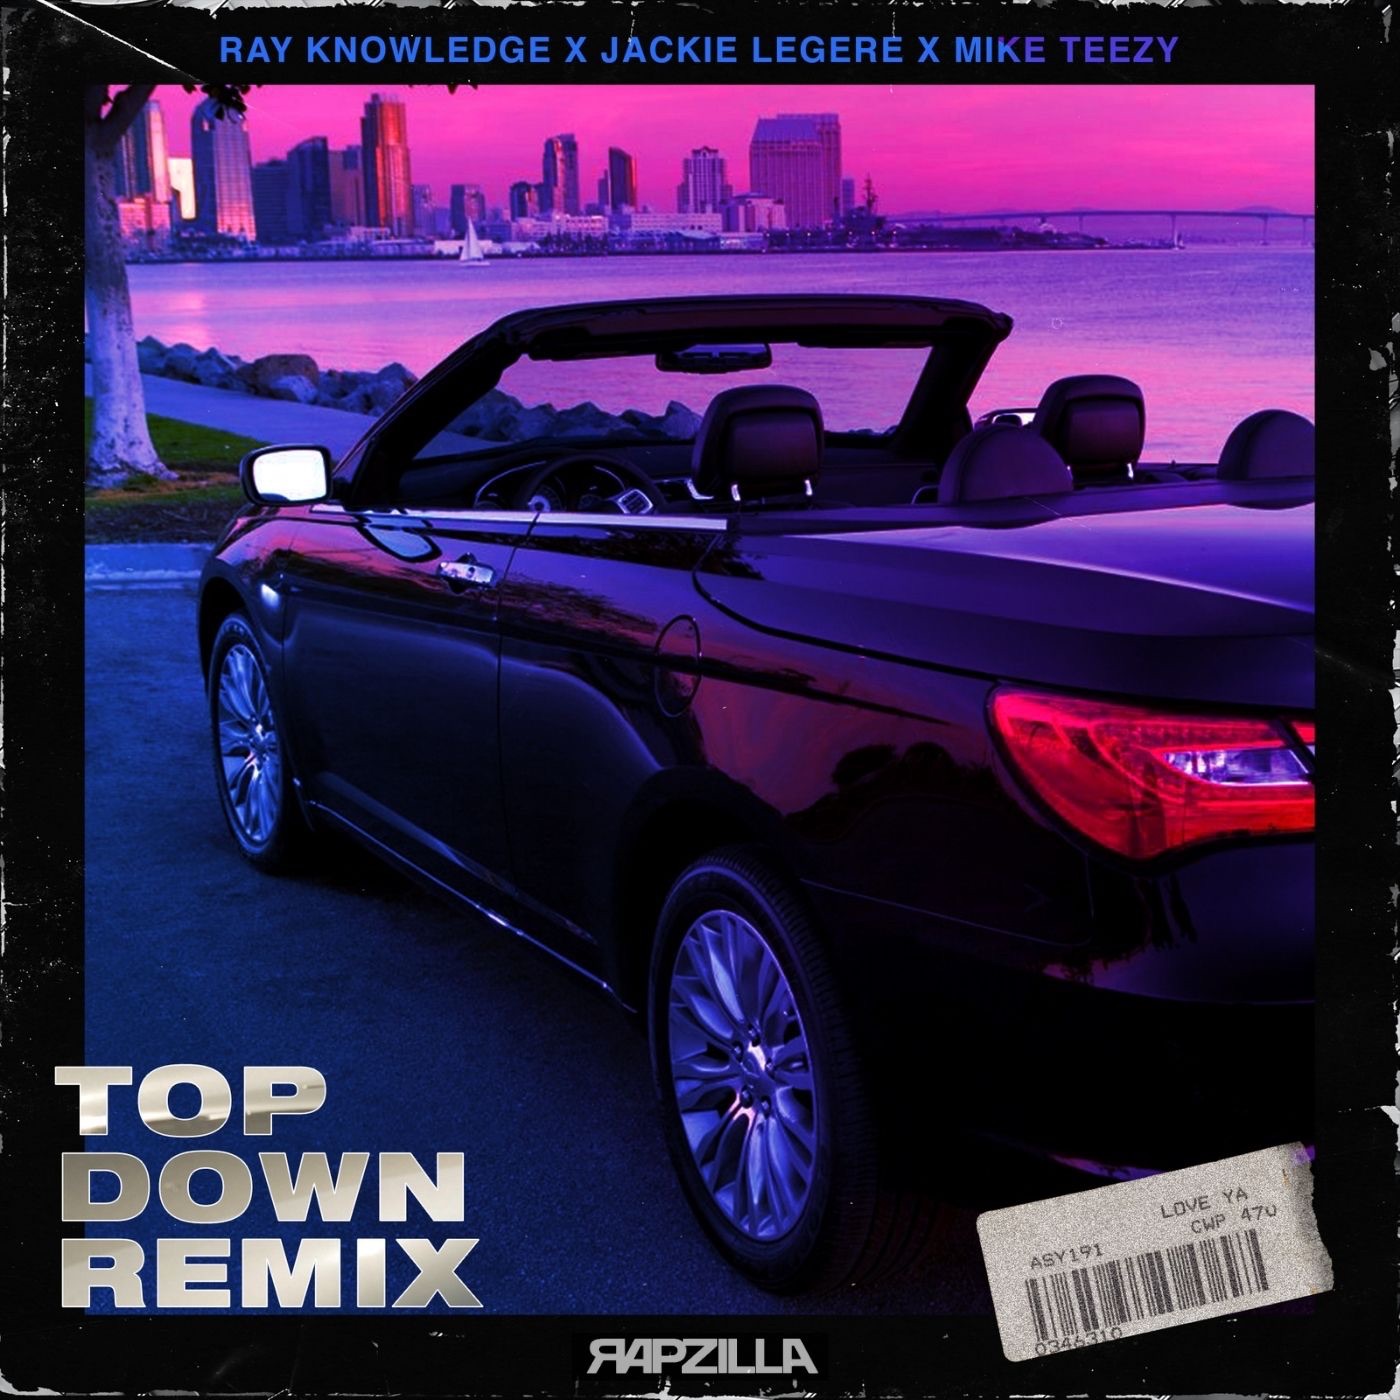 Art for Top Down Remix (feat. Mike Teezy & Jackie Legere) by Ray Knowledge & Rapzilla